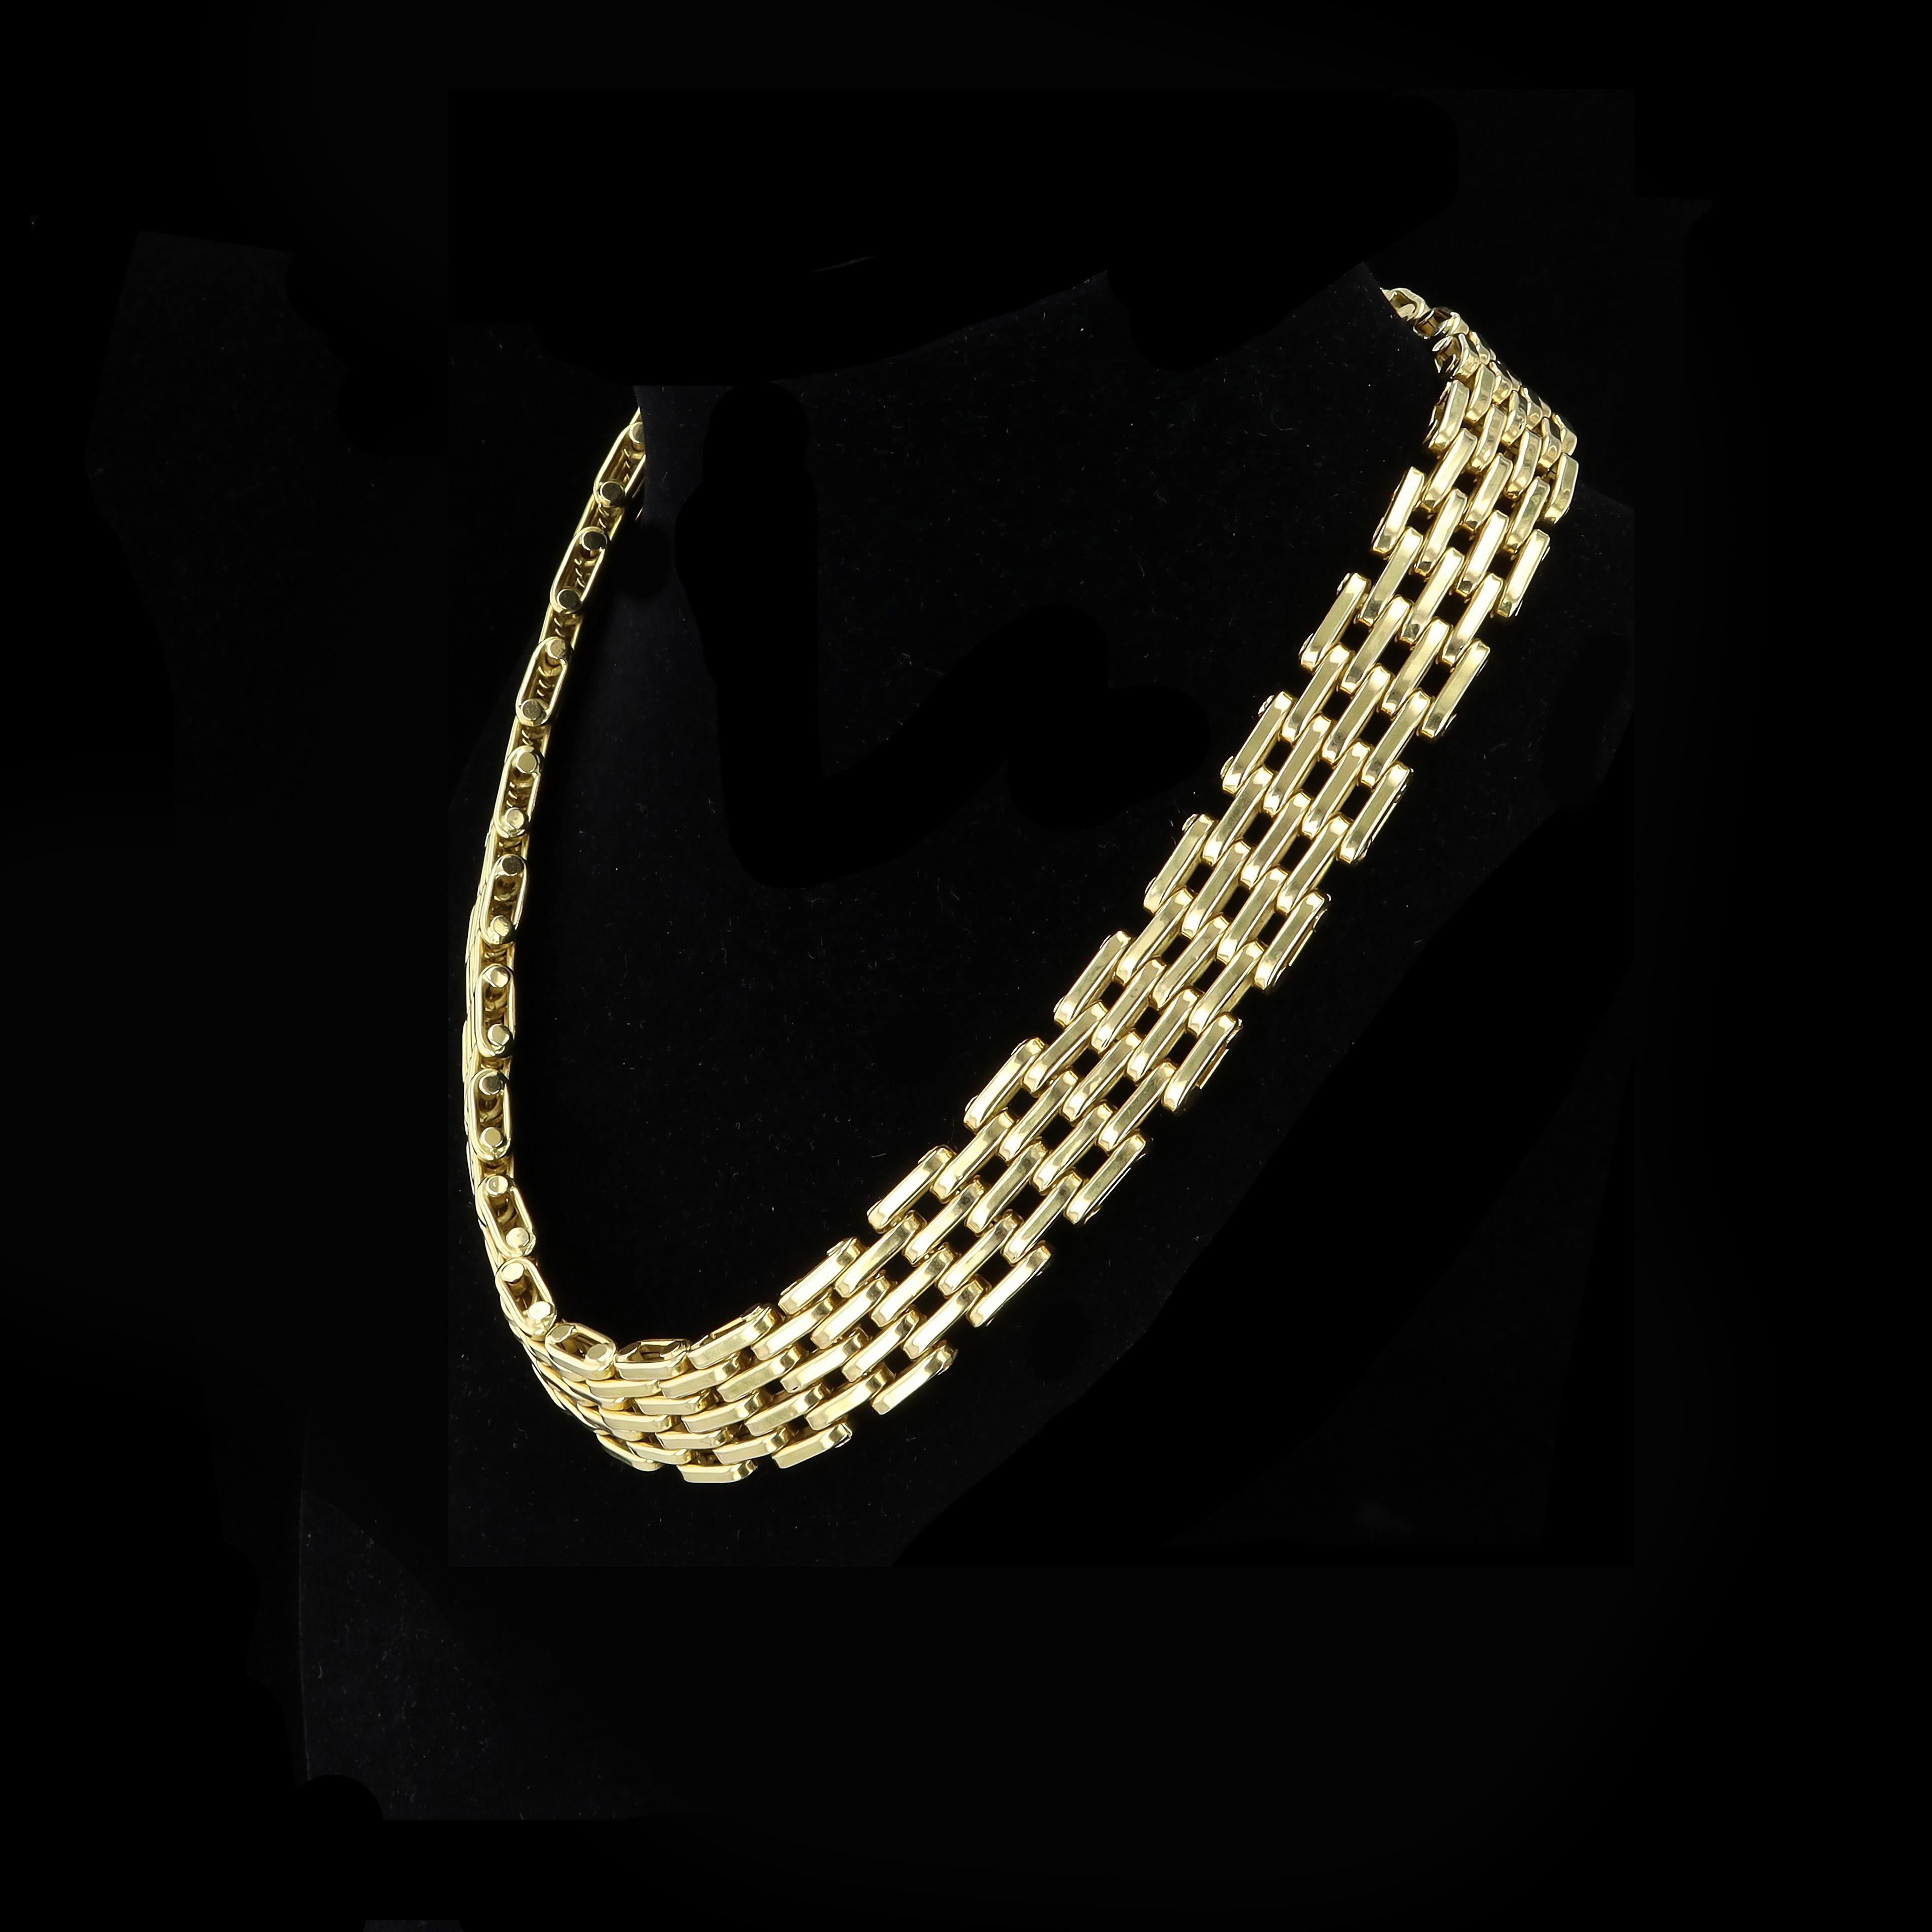 Layers and layers of links are blended together in a stunning 18K yellow gold statement. The multi link chain necklace measures 18 inches in length and 16.5mm in width. The necklace is stamped 750 and weighs 76.4 grams.

